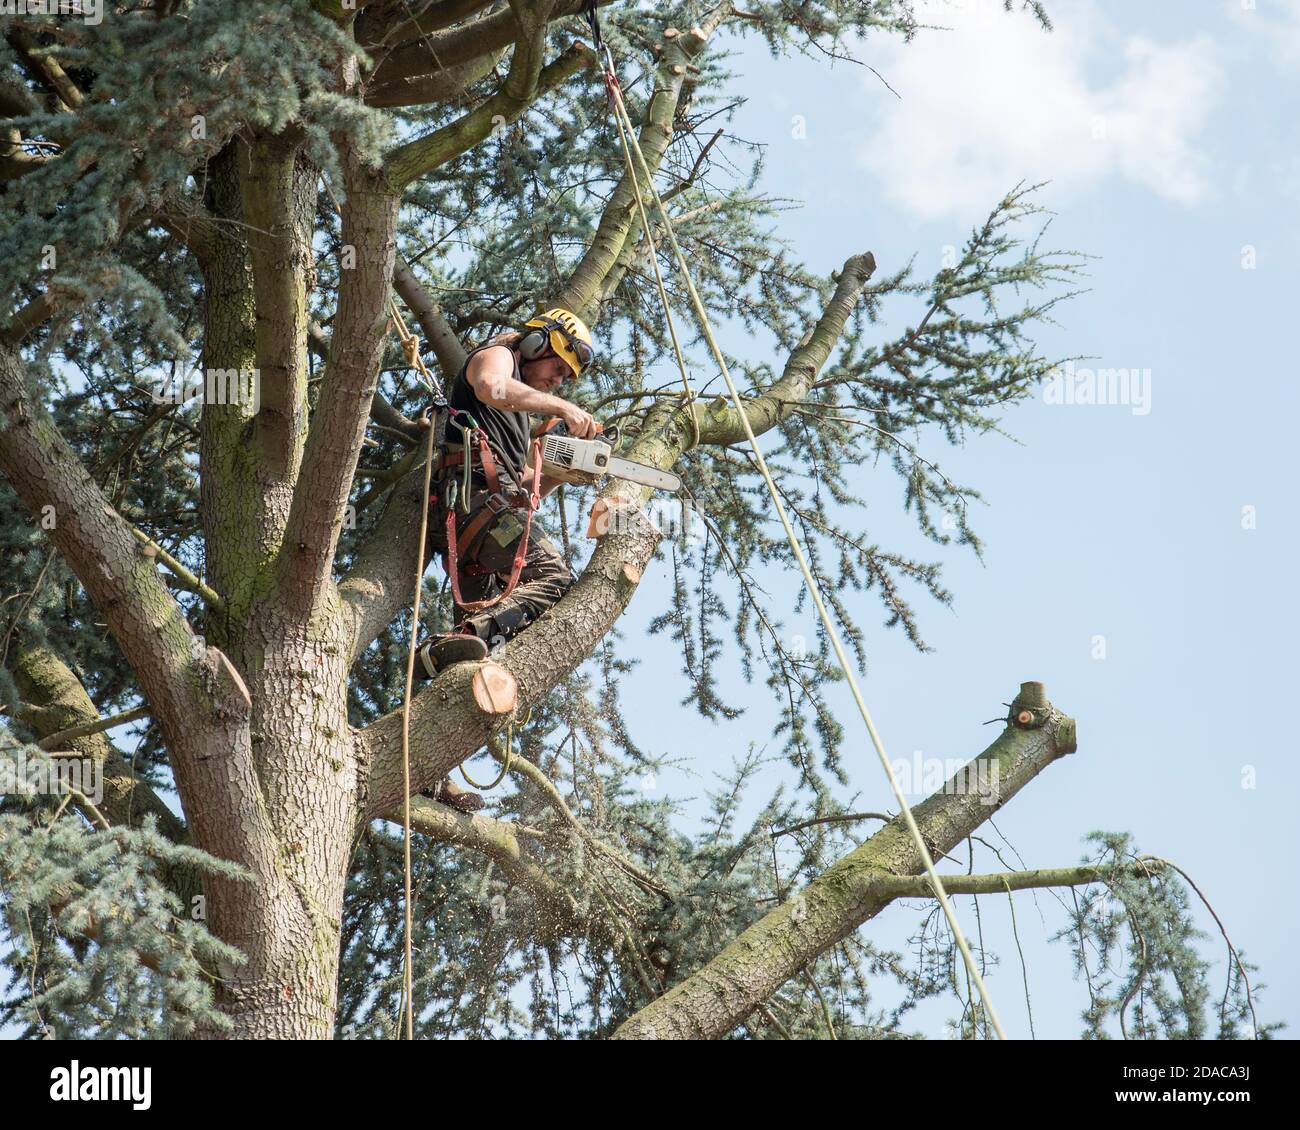 Tree Surgeon or Arborist cutting branches off a tree. Stock Photo